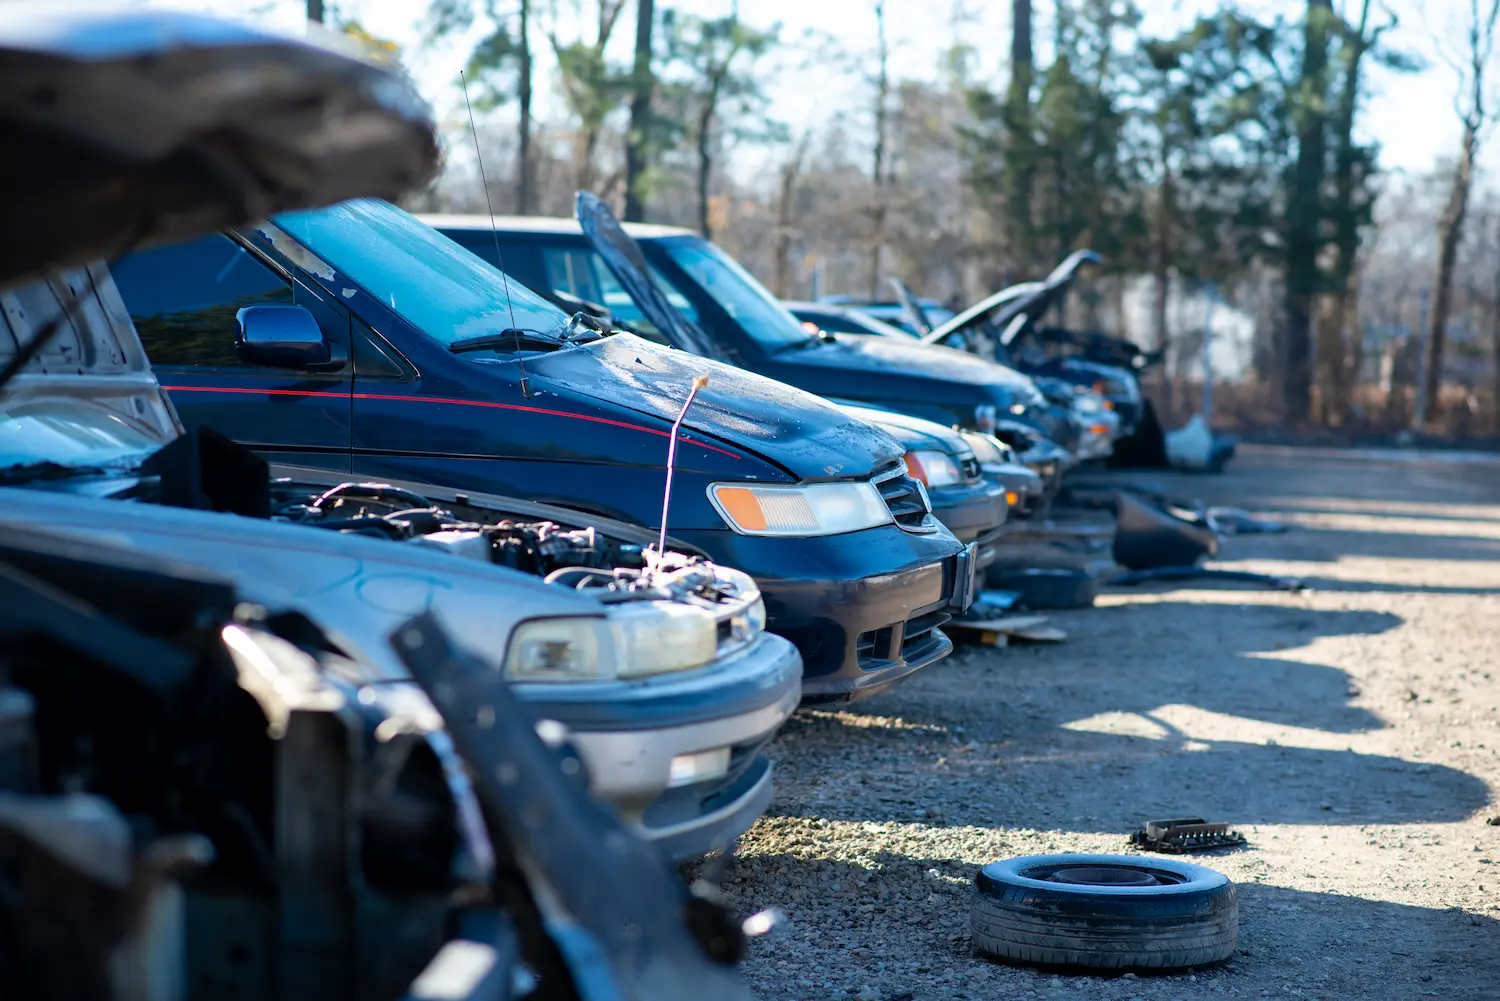 Row of junked cars